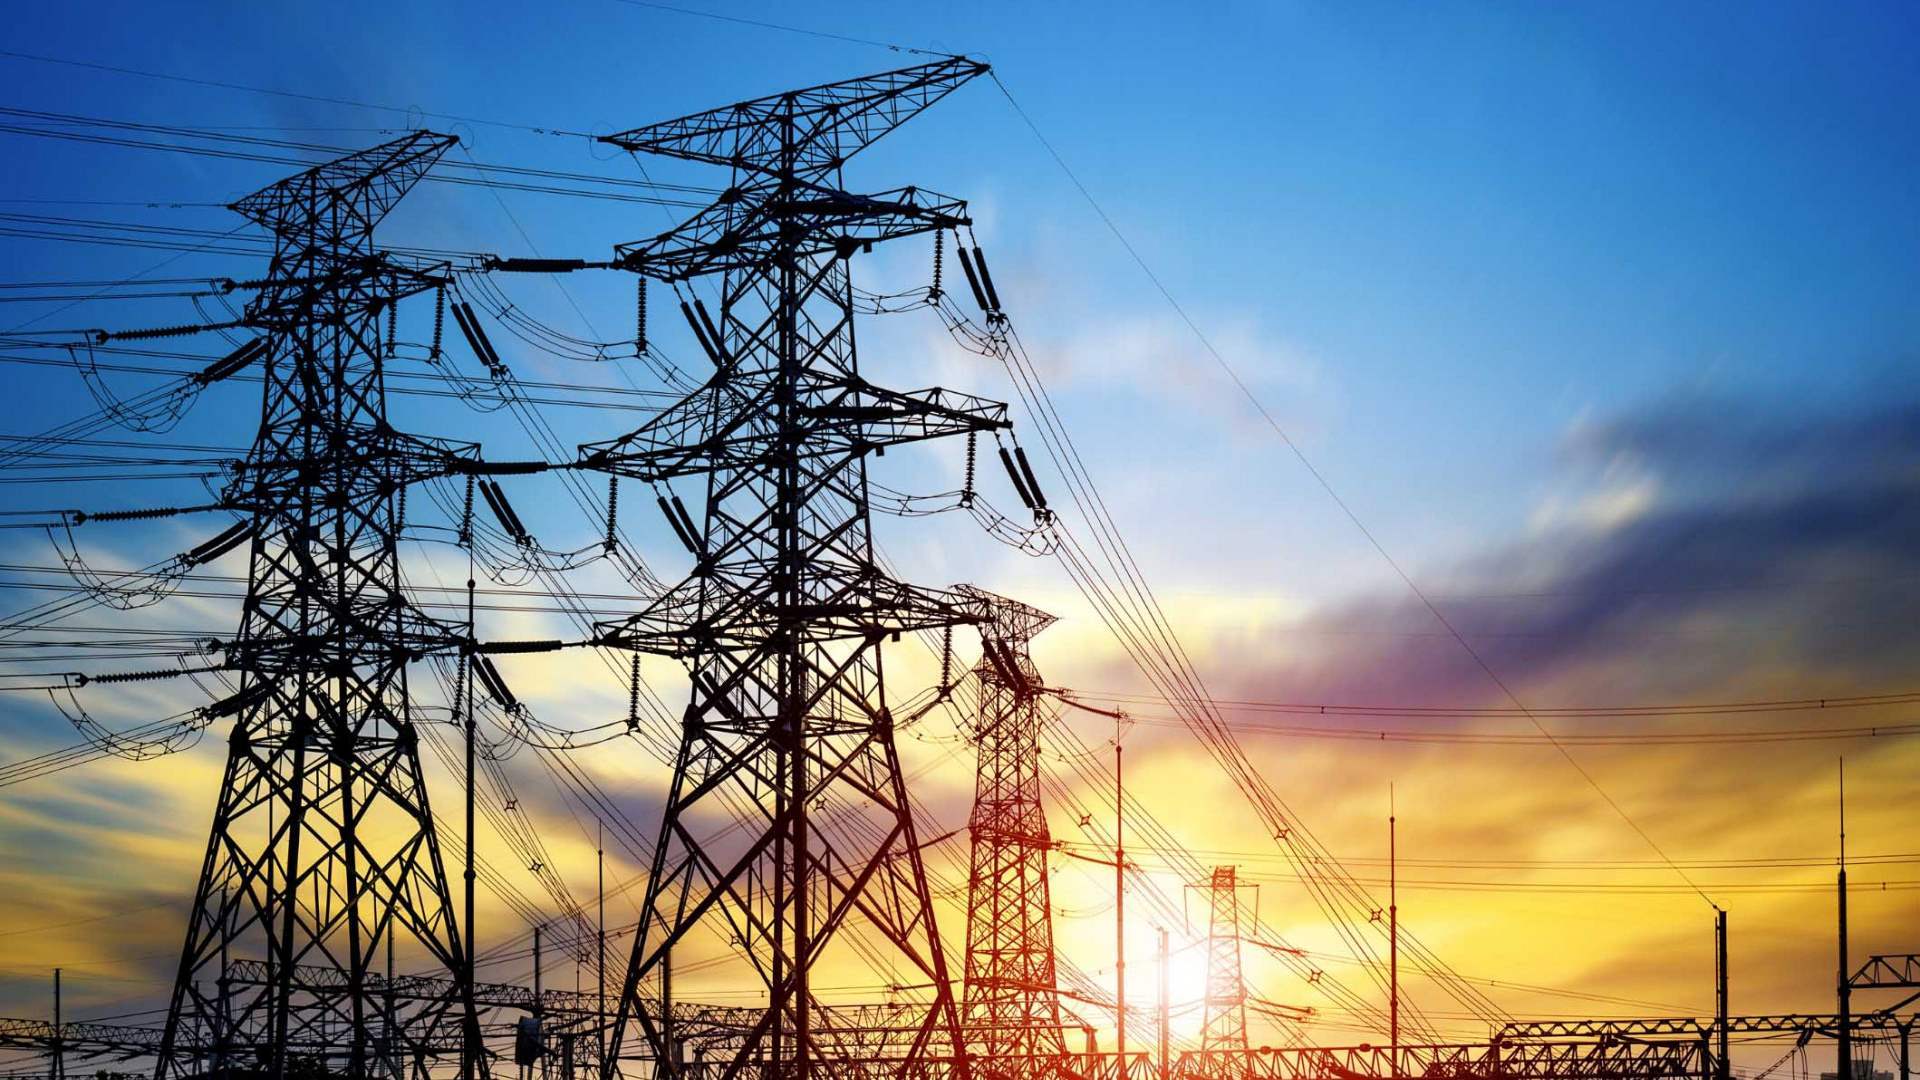 Organized theft of high-tension towers causes power outage in Bekaa, Lebanon